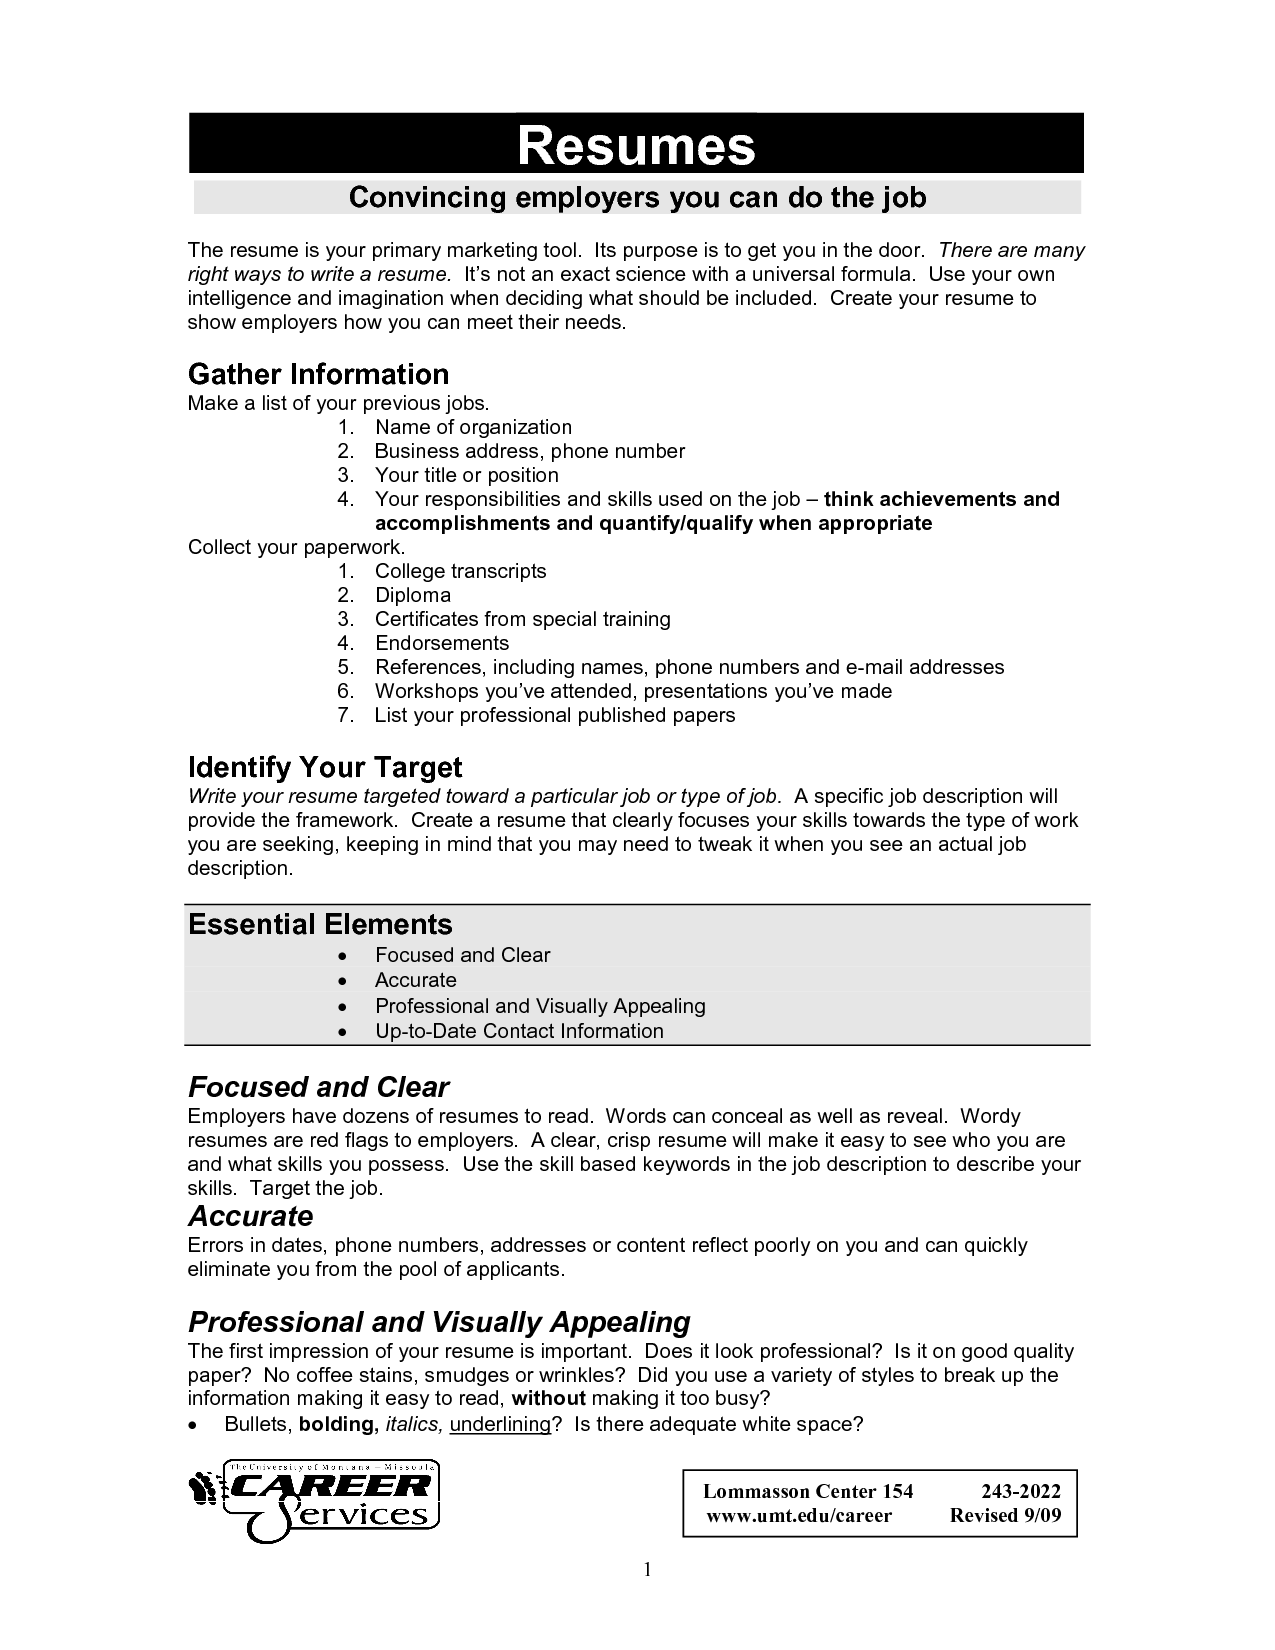 how to make a good job resumes fast lunchrock co